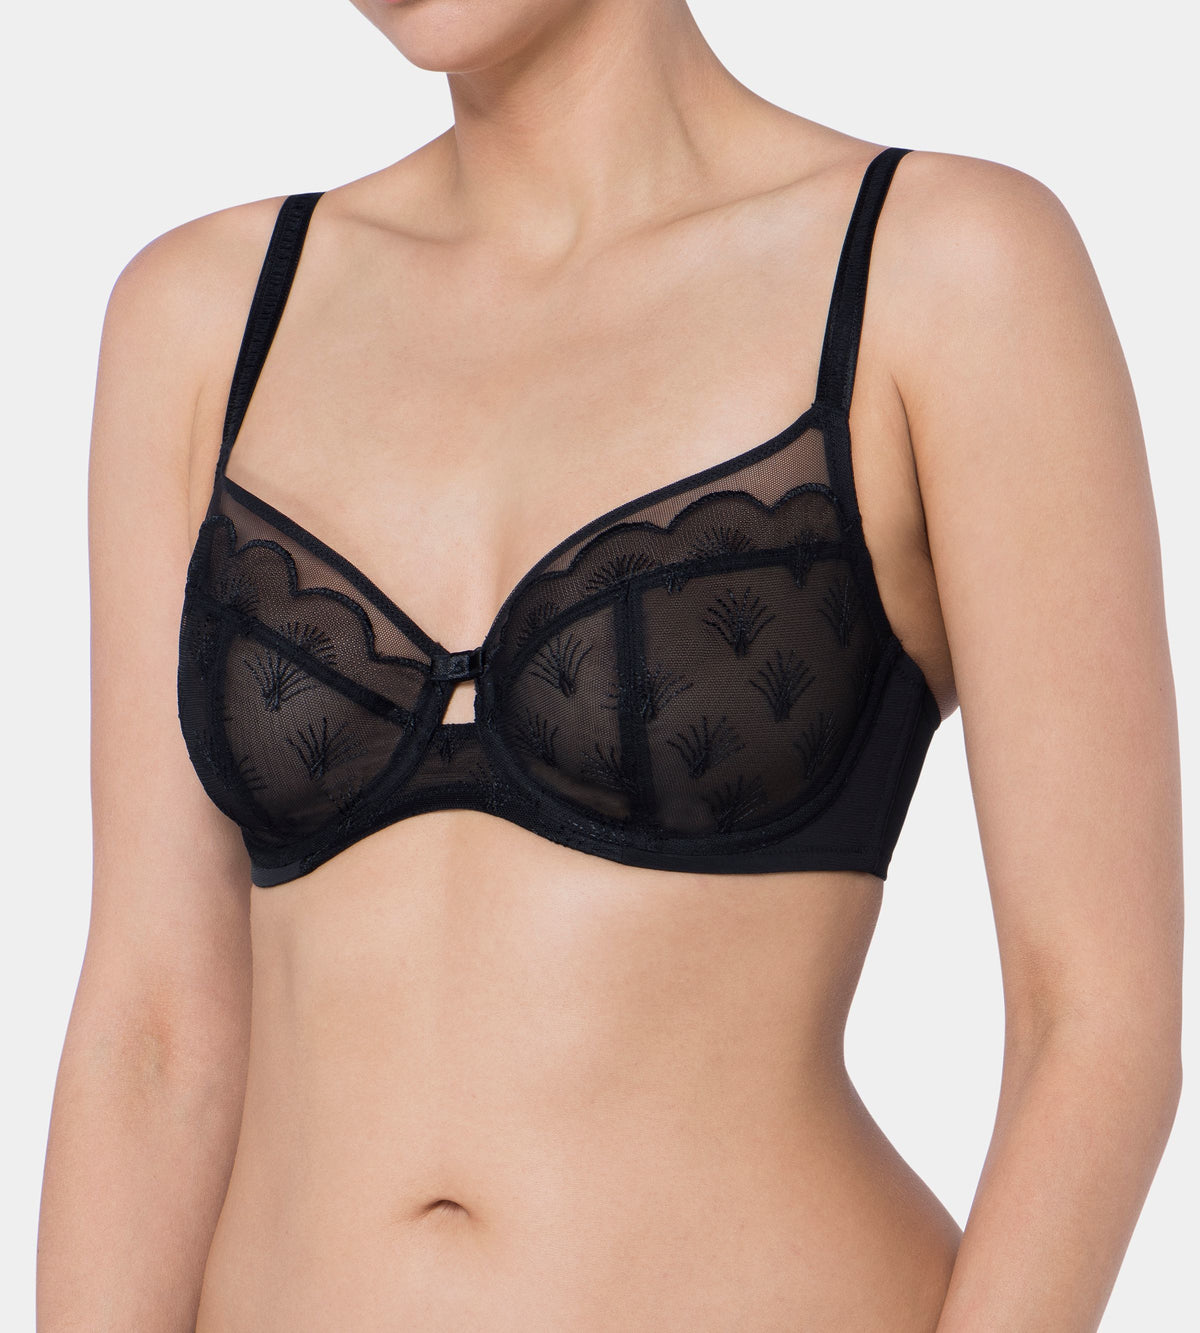 Triumph Beauty Full Grace W Wired Non Padded Lace Bra 10181301 - Black